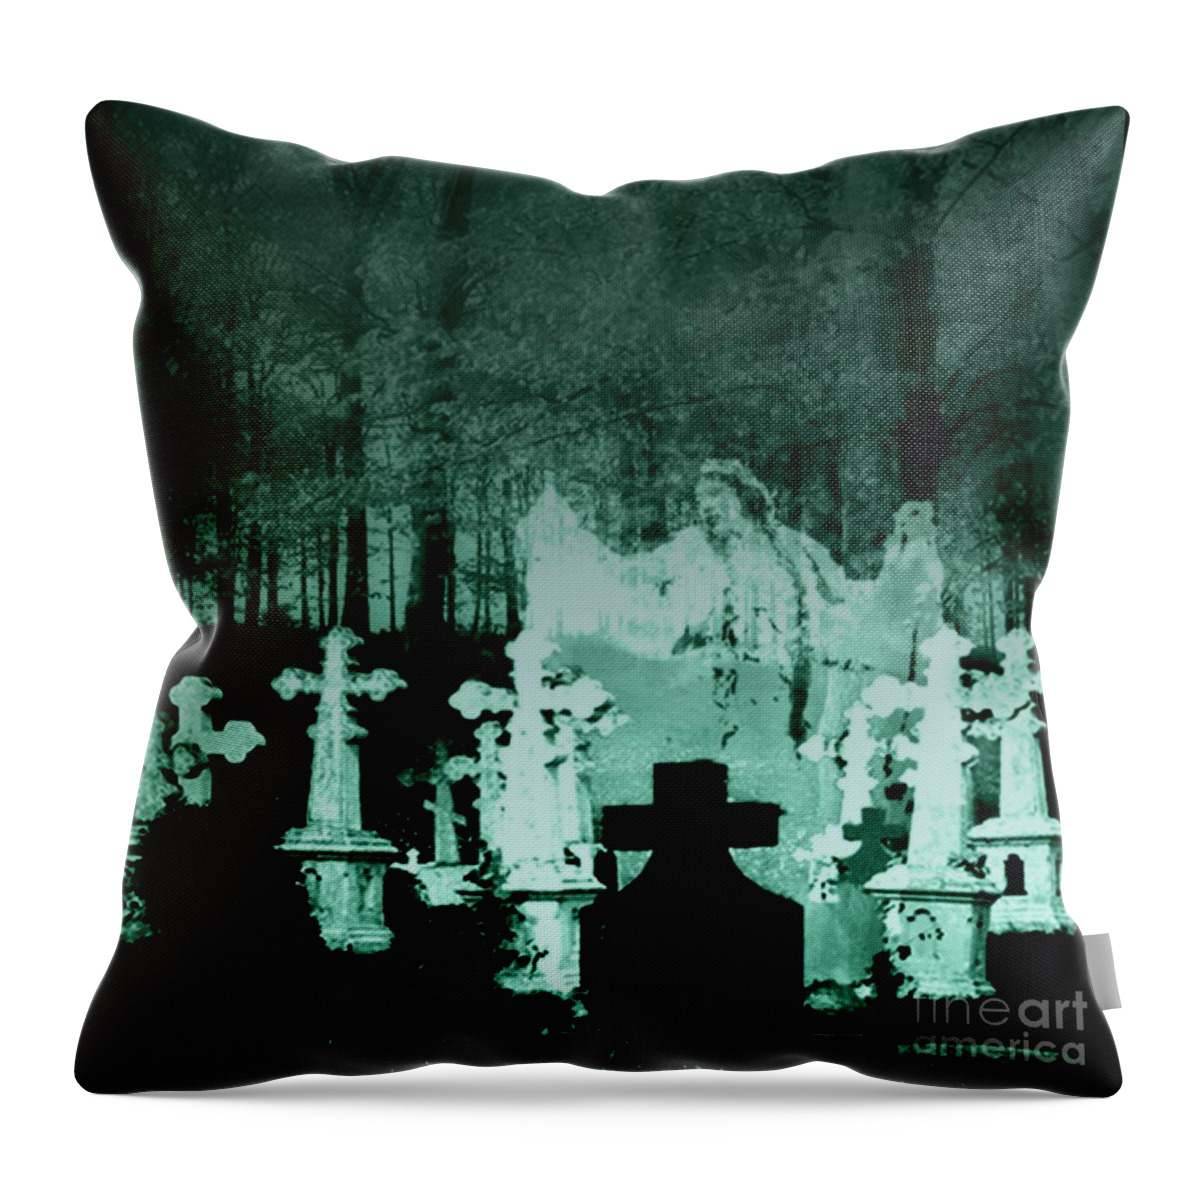 Grave Throw Pillow featuring the digital art Grave Dancing by Desiree Paquette